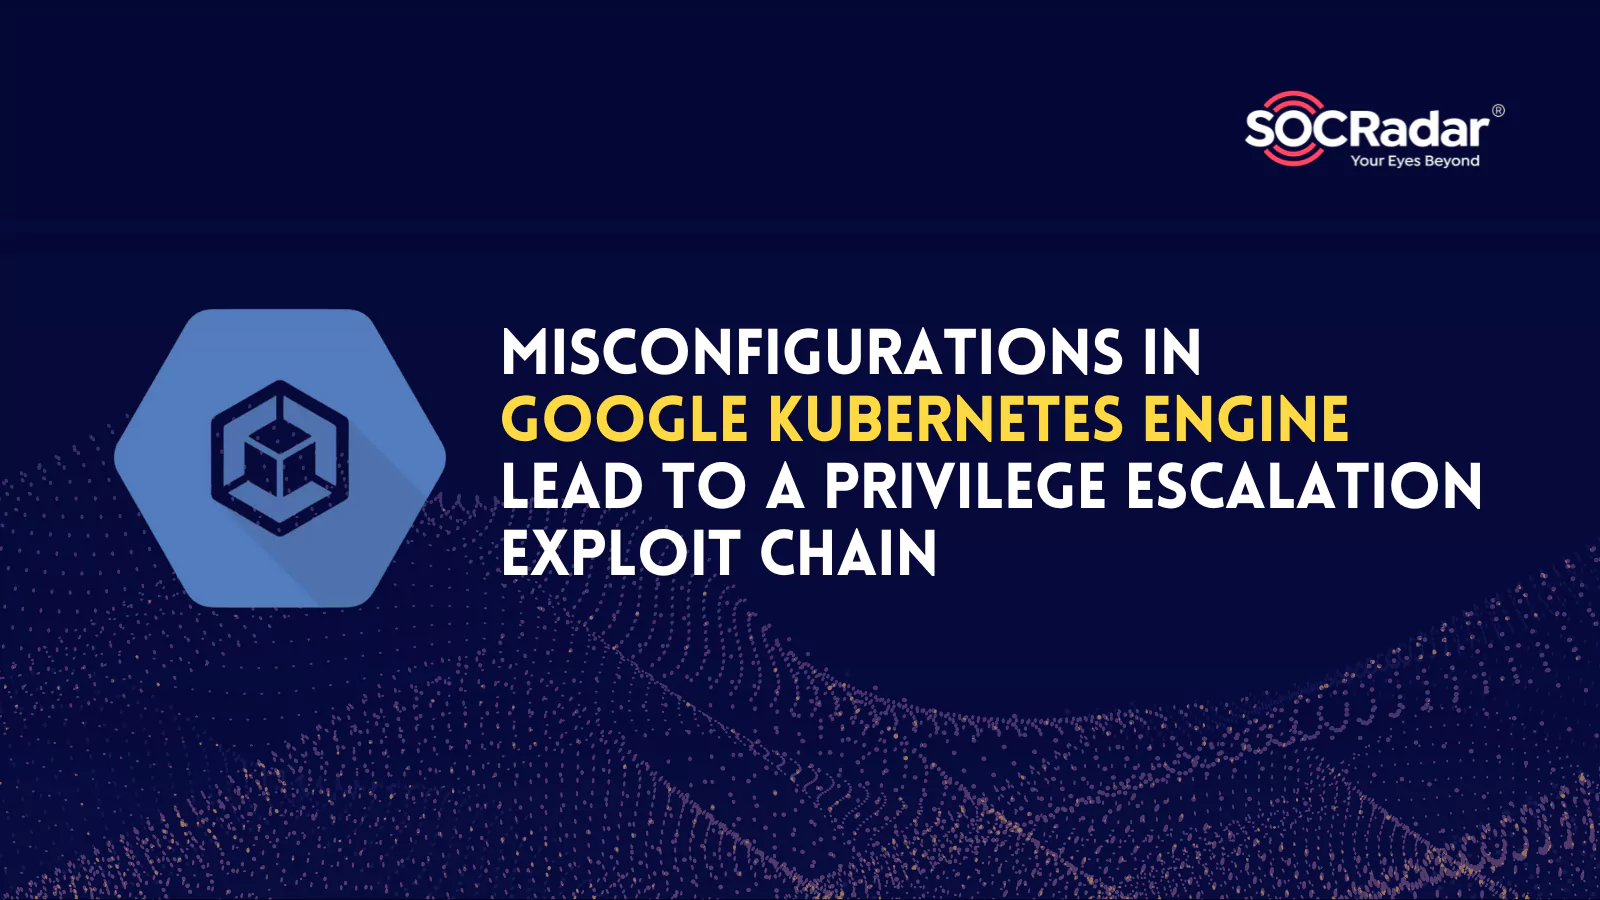 SOCRadar® Cyber Intelligence Inc. | Misconfigurations in Google Kubernetes Engine (GKE) Lead to a Privilege Escalation Exploit Chain